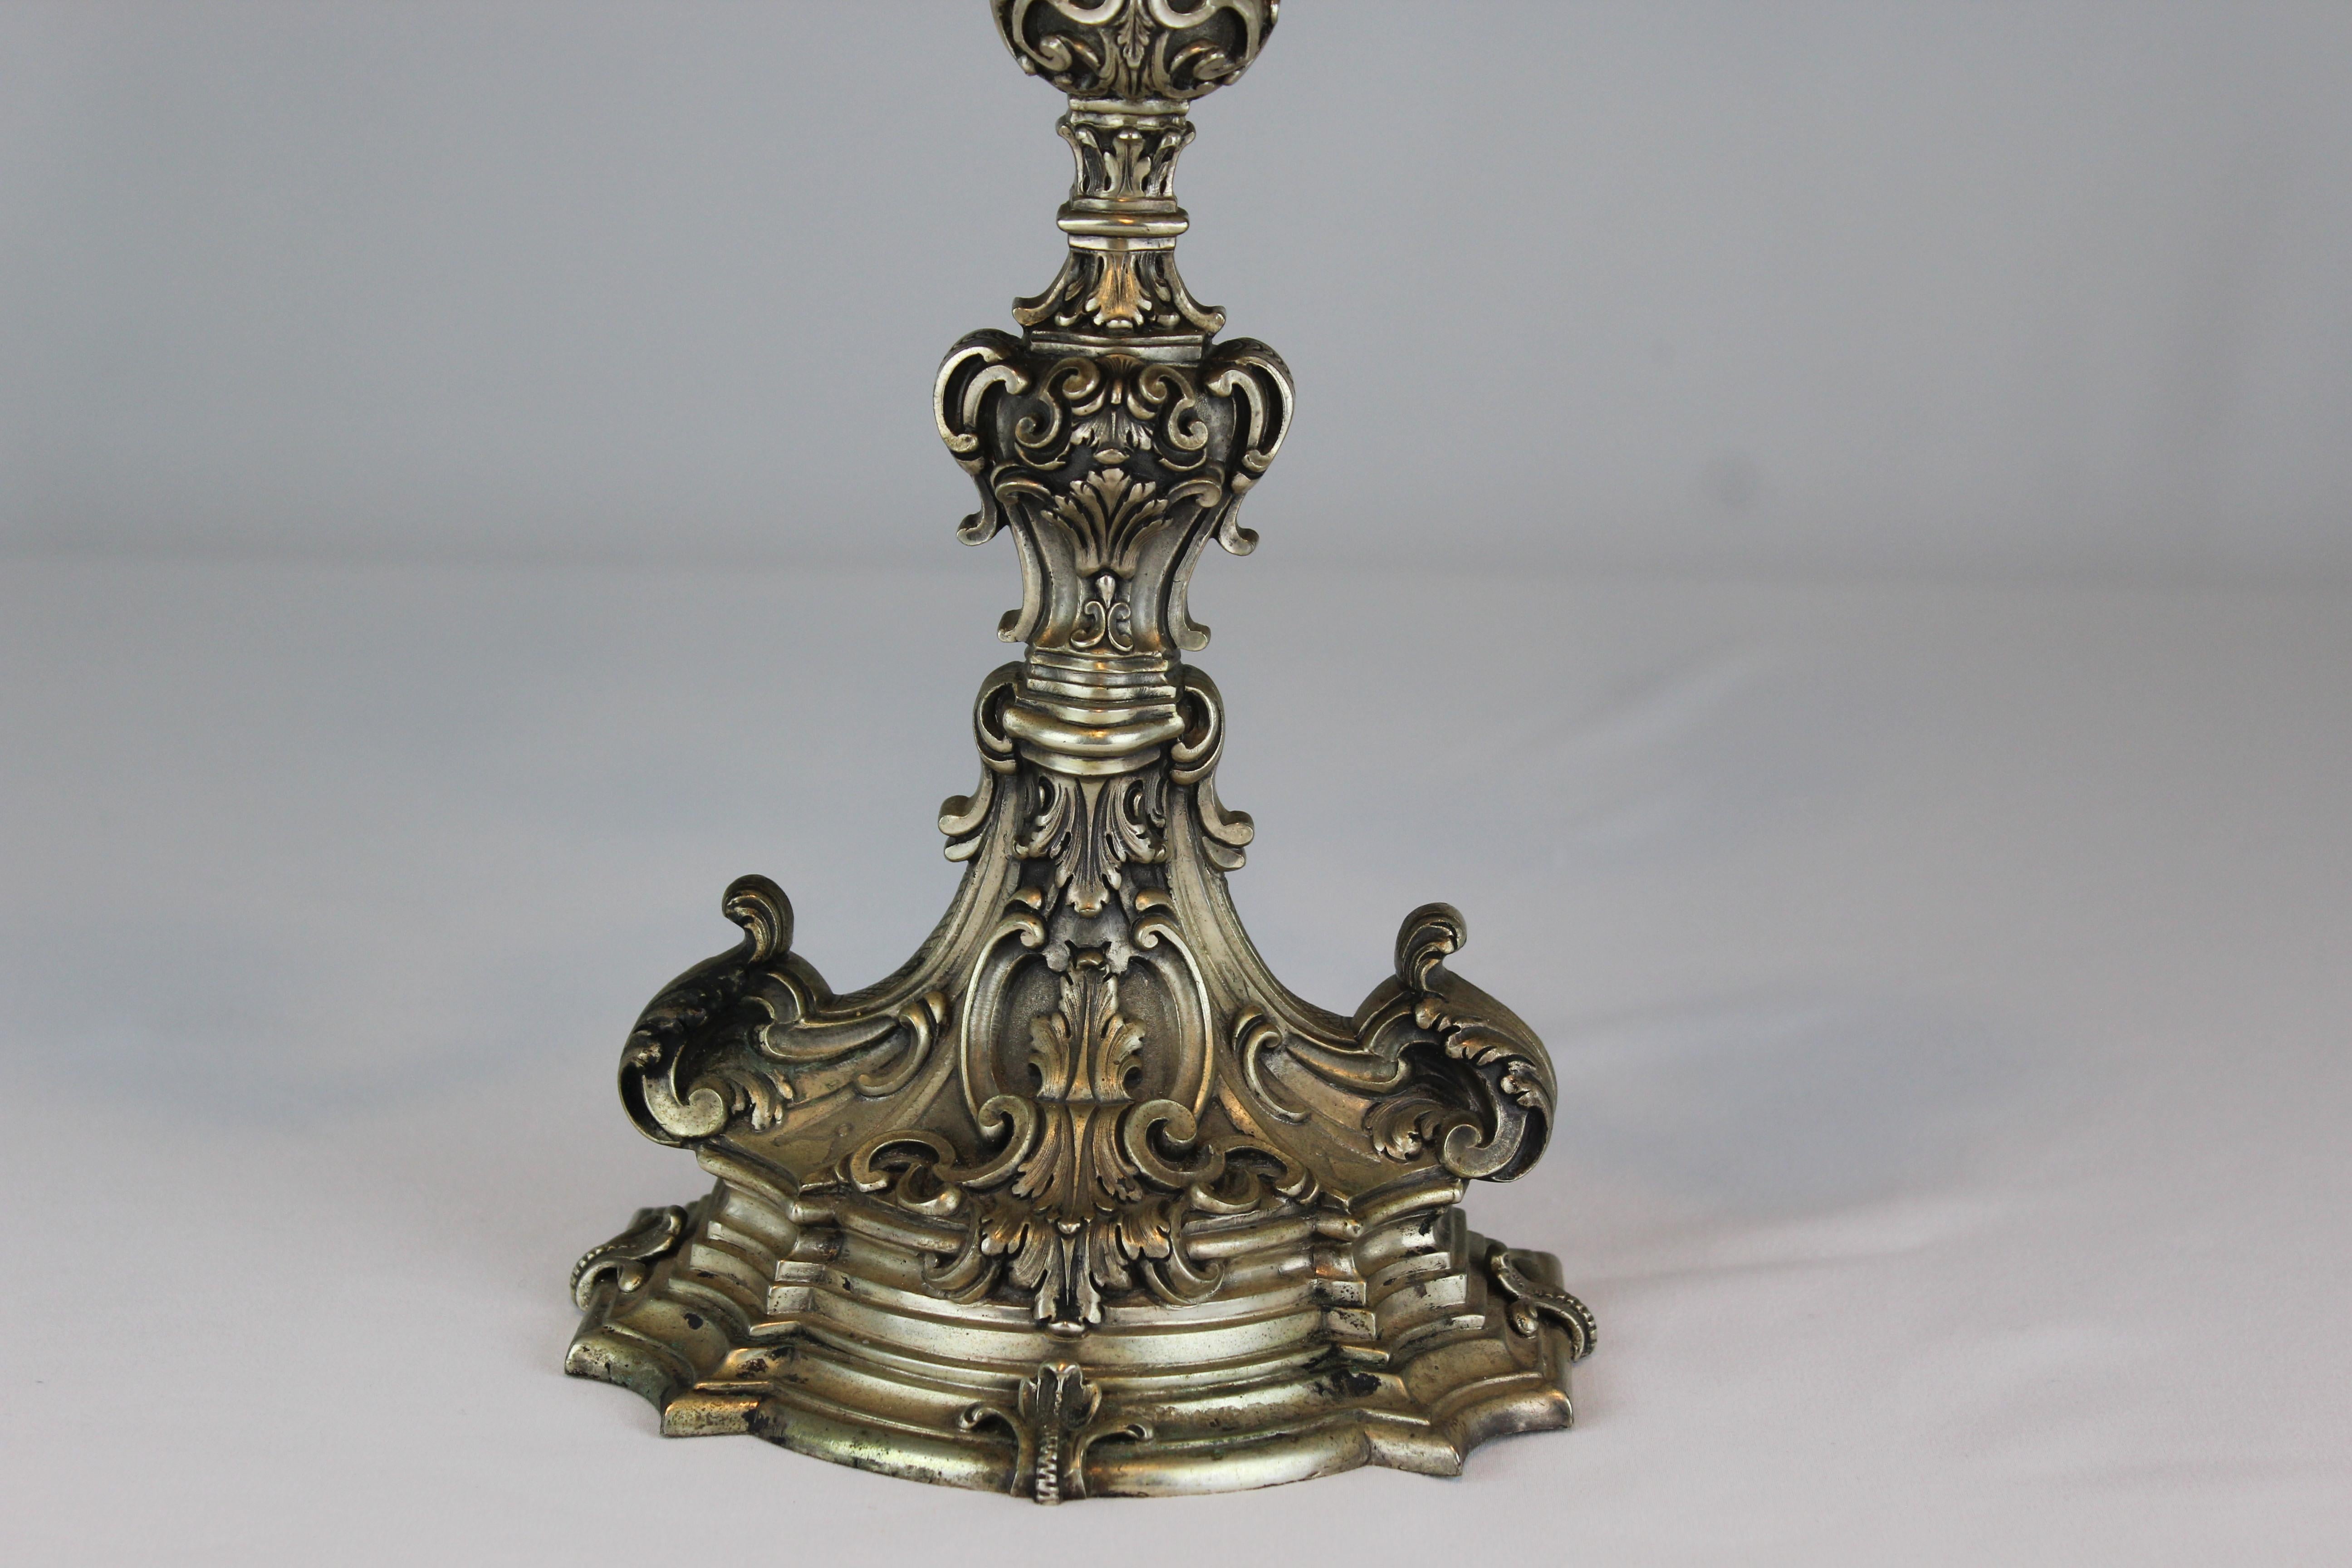  We offer 5 arms candelabra in Silver 800/°°. It was manufactured in Italy at the beginning 1900 and it is still in perfect conditions. It is exactly as shown in the pictures. Under request, they can be repolished and replated. We took them back